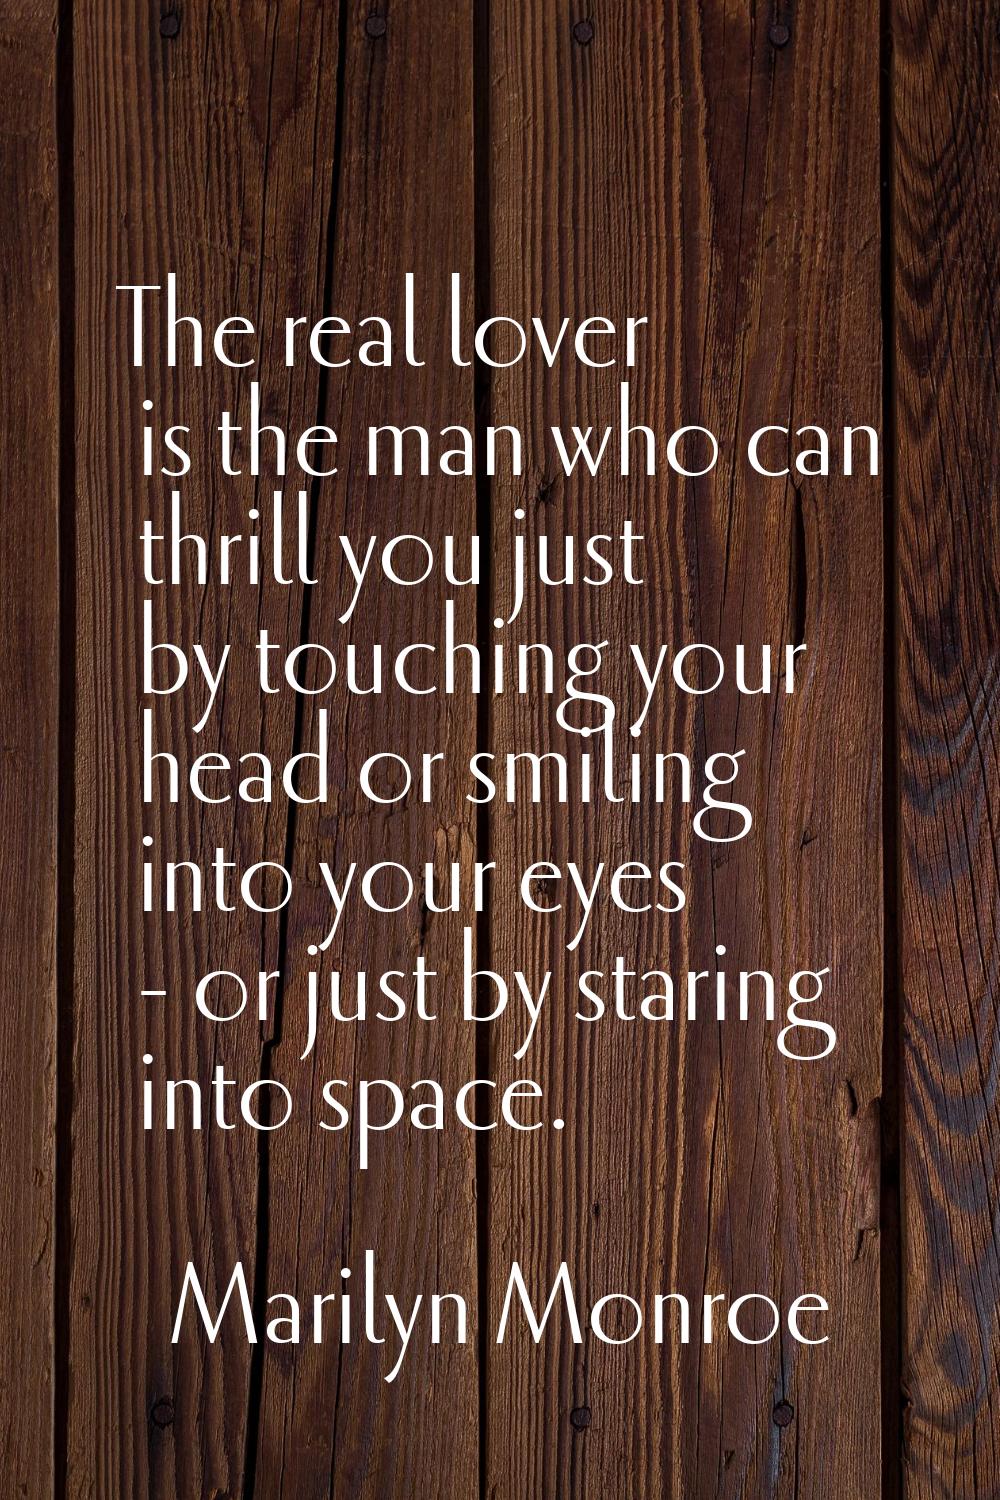 The real lover is the man who can thrill you just by touching your head or smiling into your eyes -